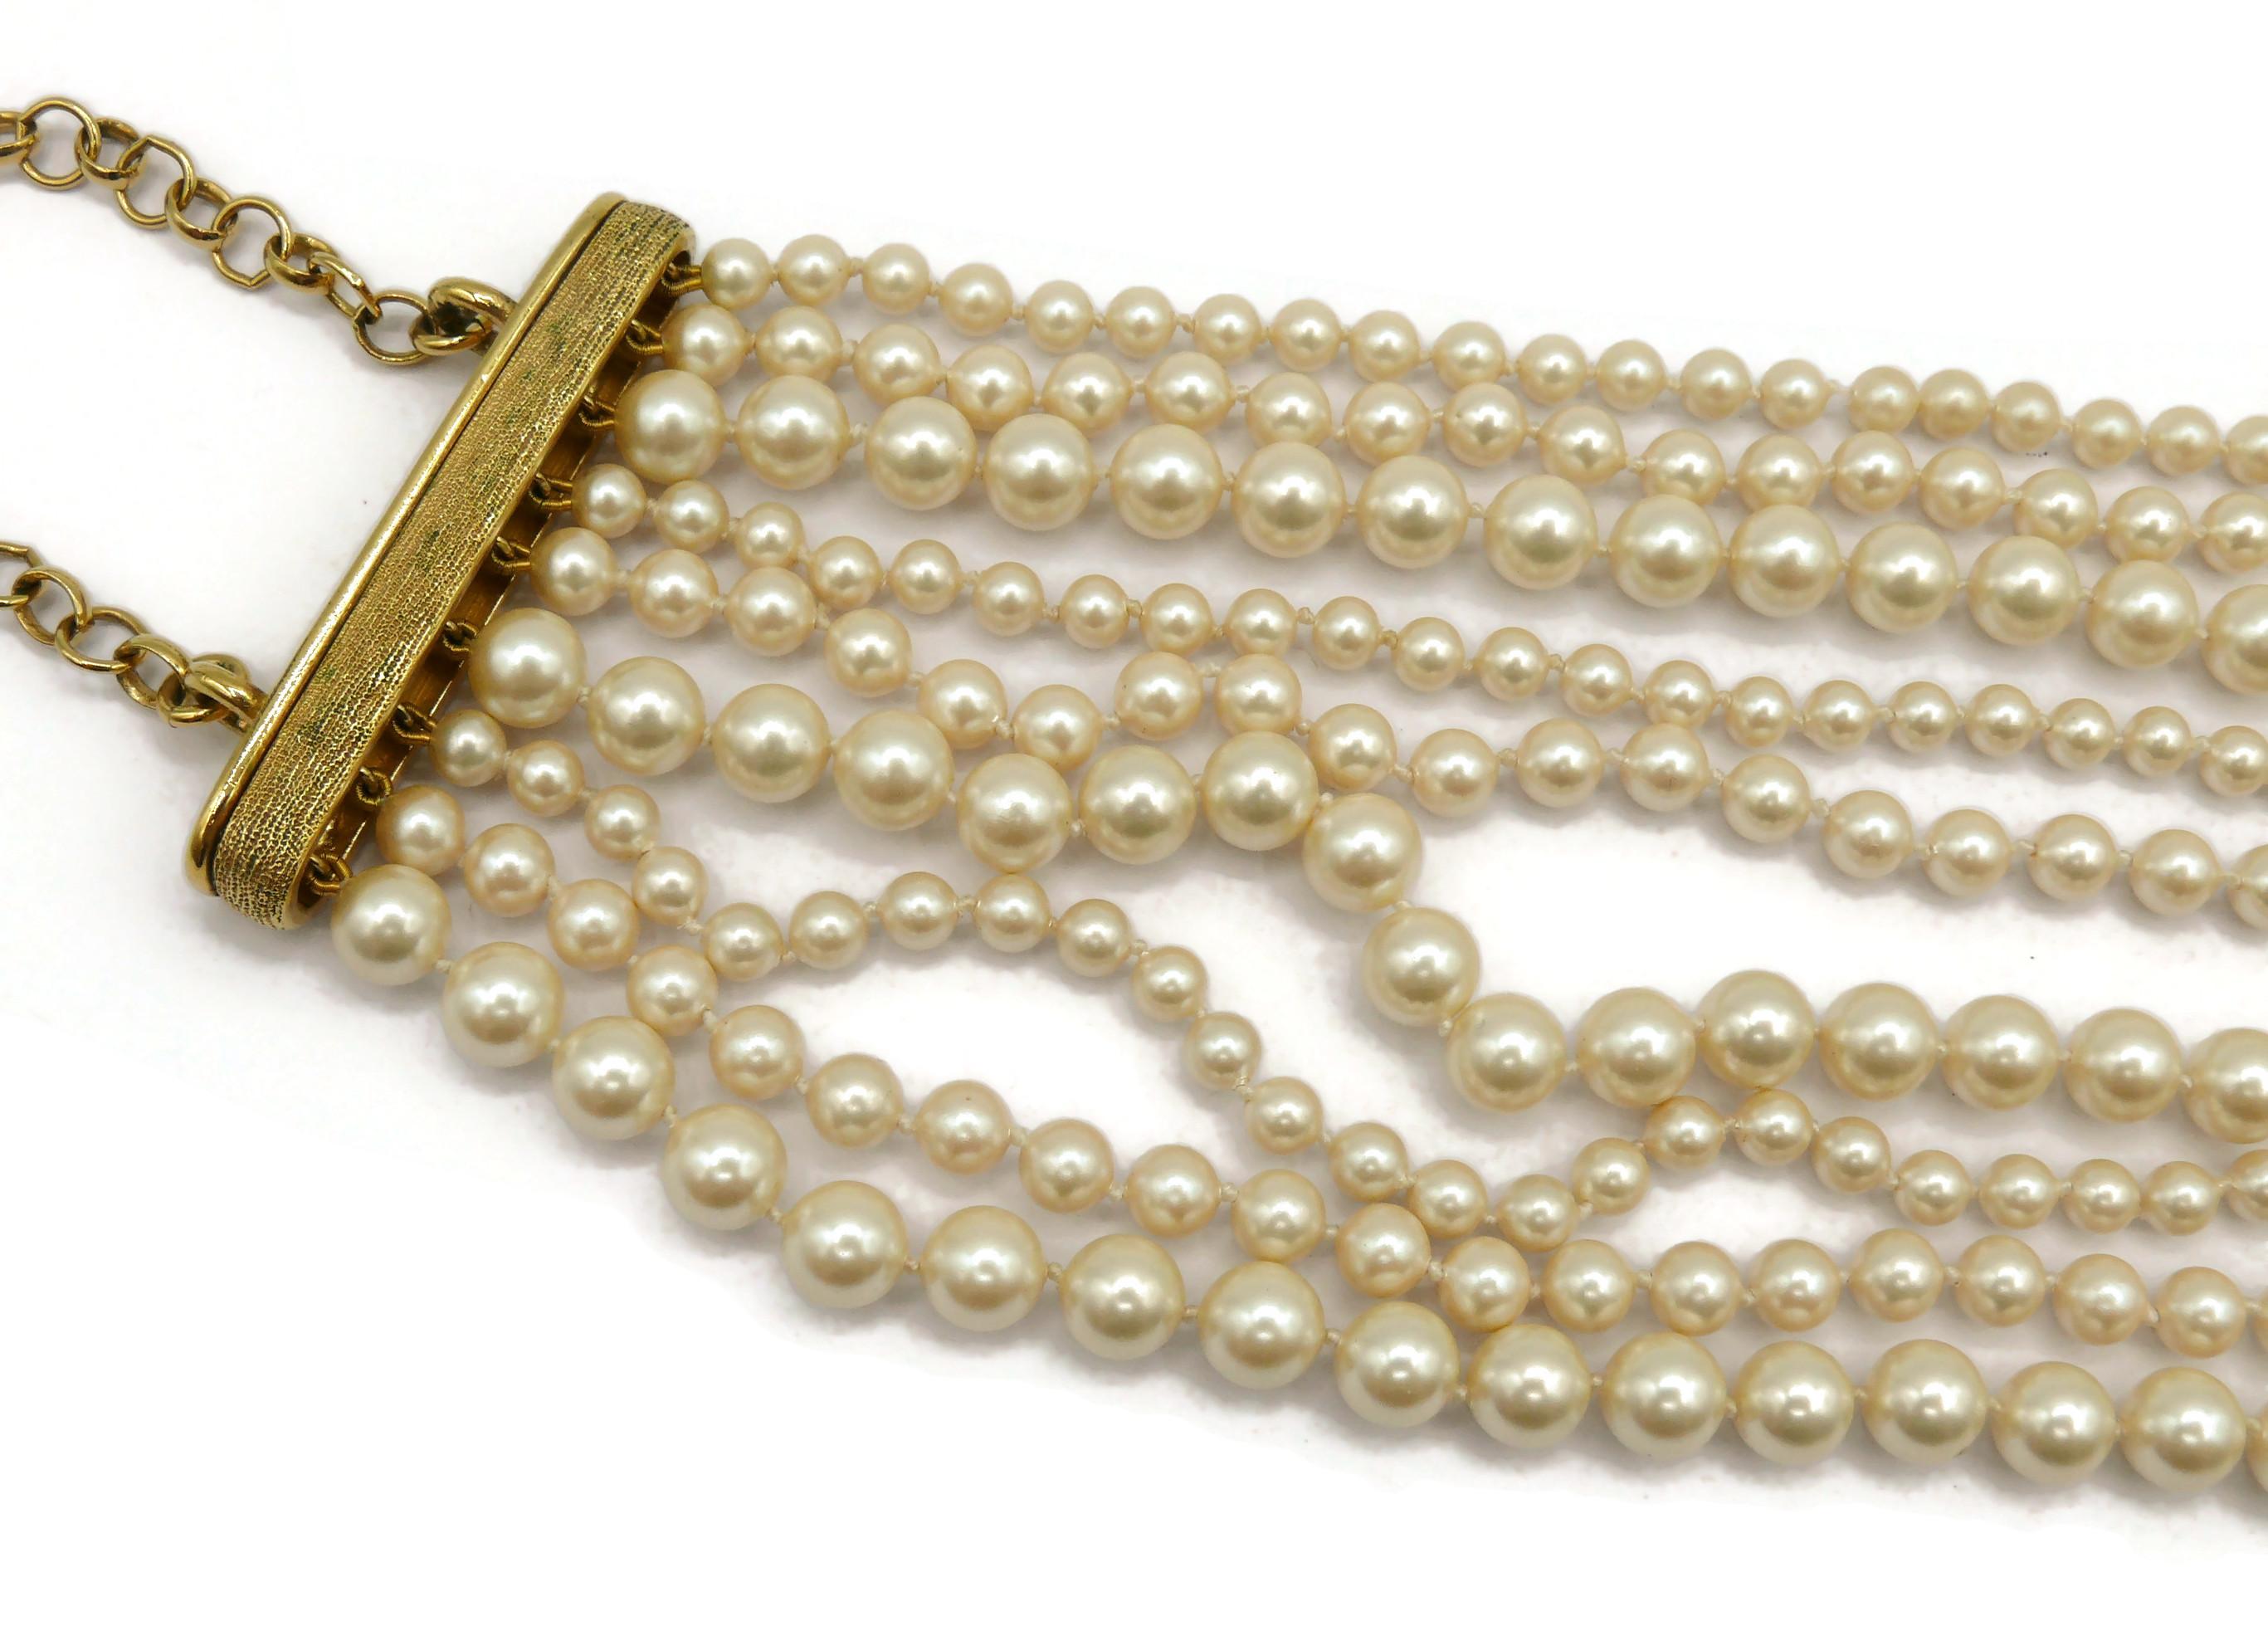 CHRISTIAN DIOR Vintage Multi-Strand Faux Pearl Necklace For Sale 2